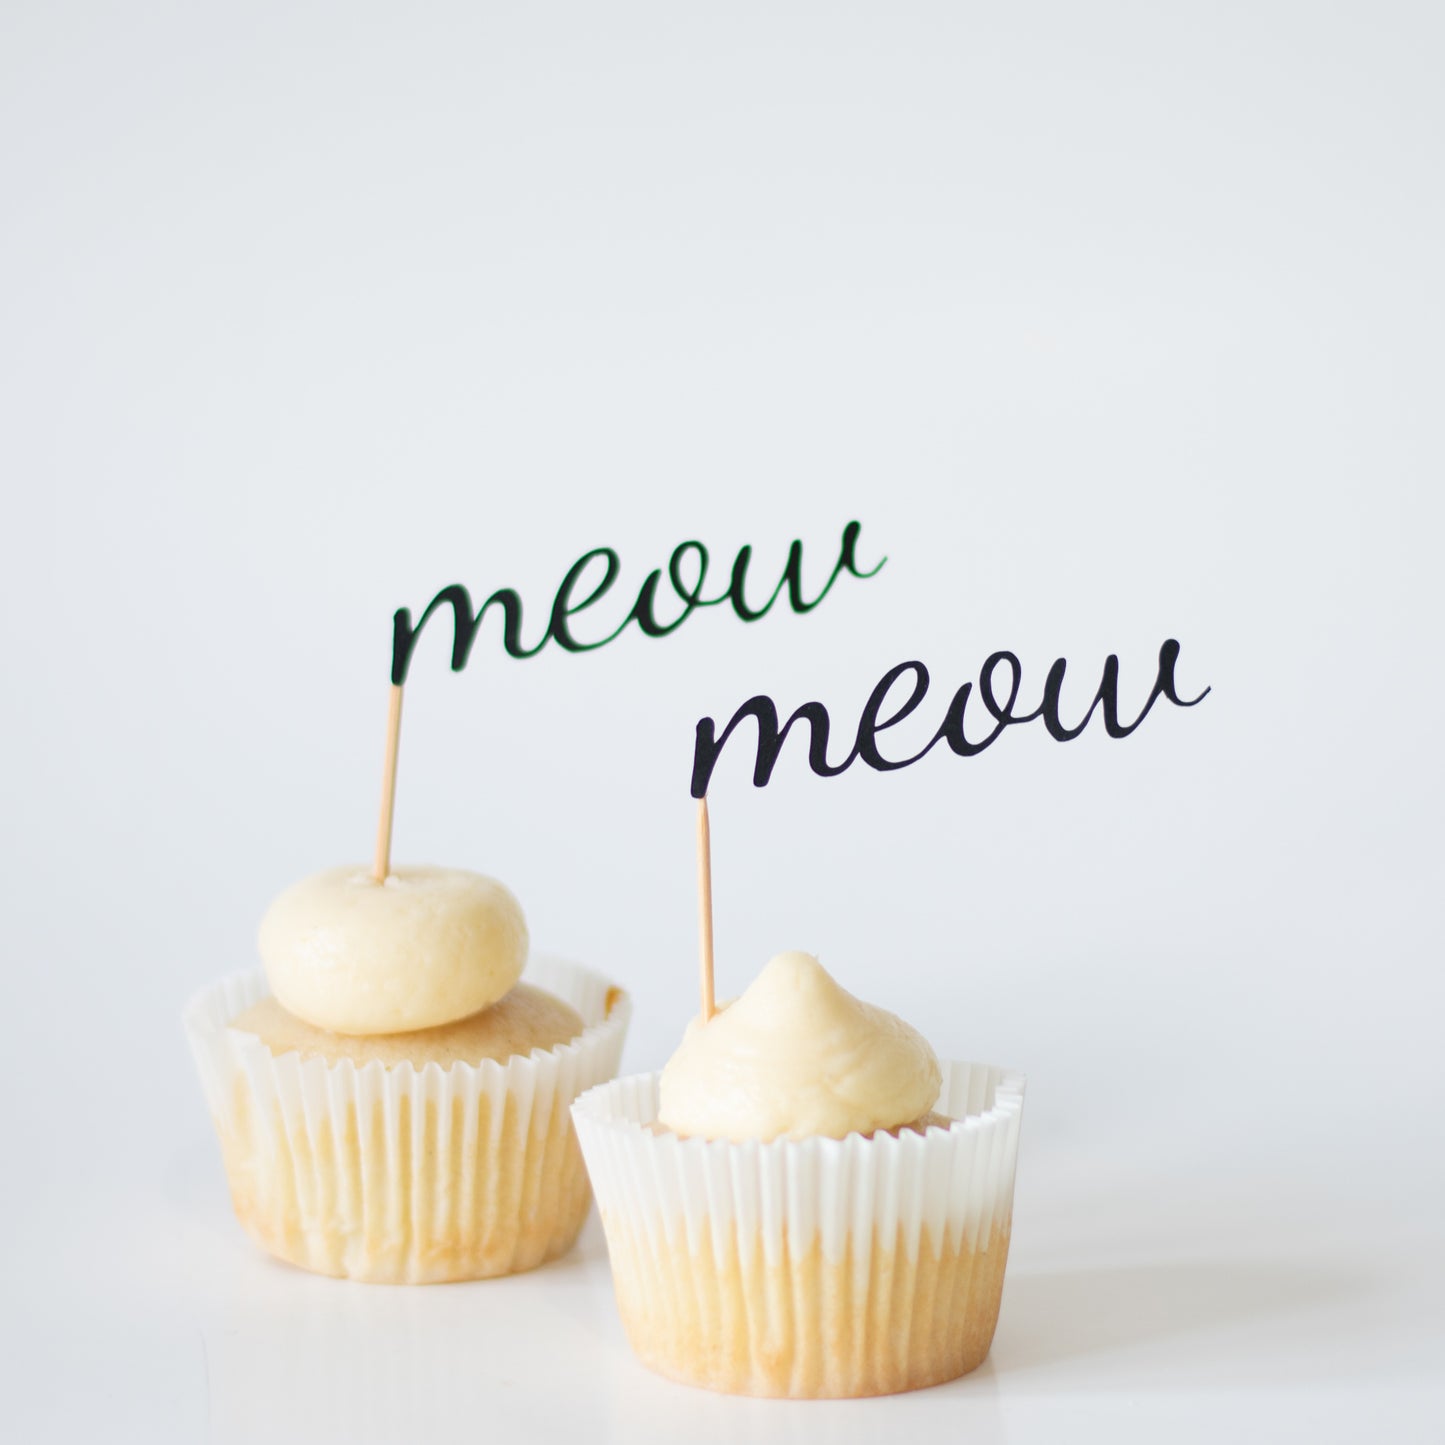 meow Cupcake Toppers